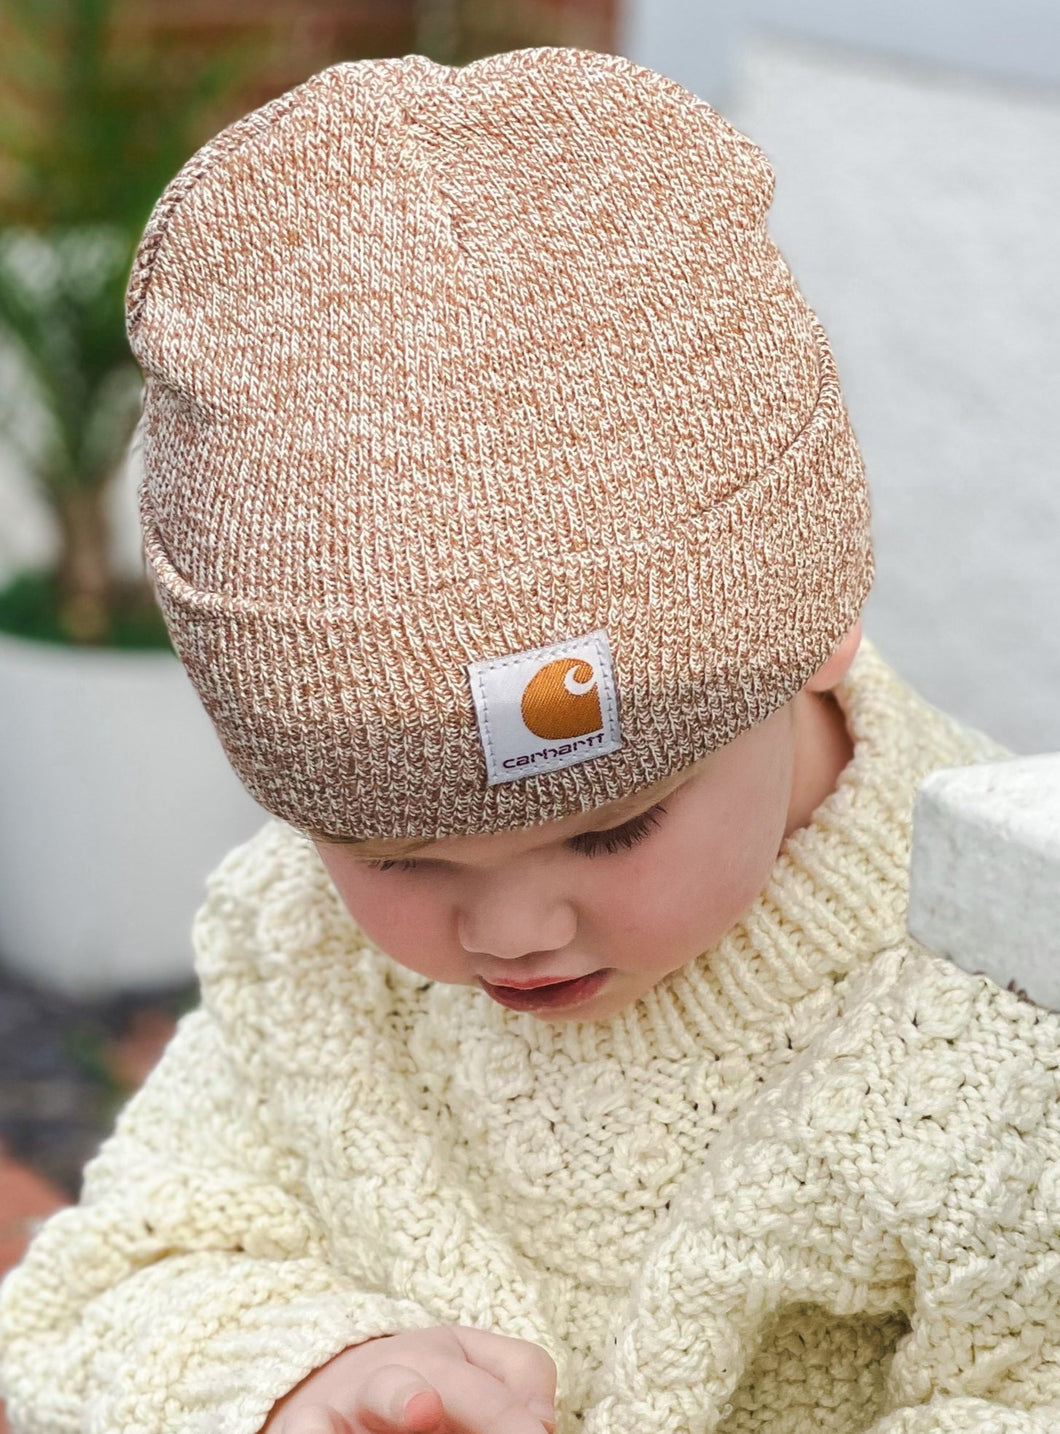 Carhartt Copper Marl Watch Hat - Toddler Size - Age 1-2 years